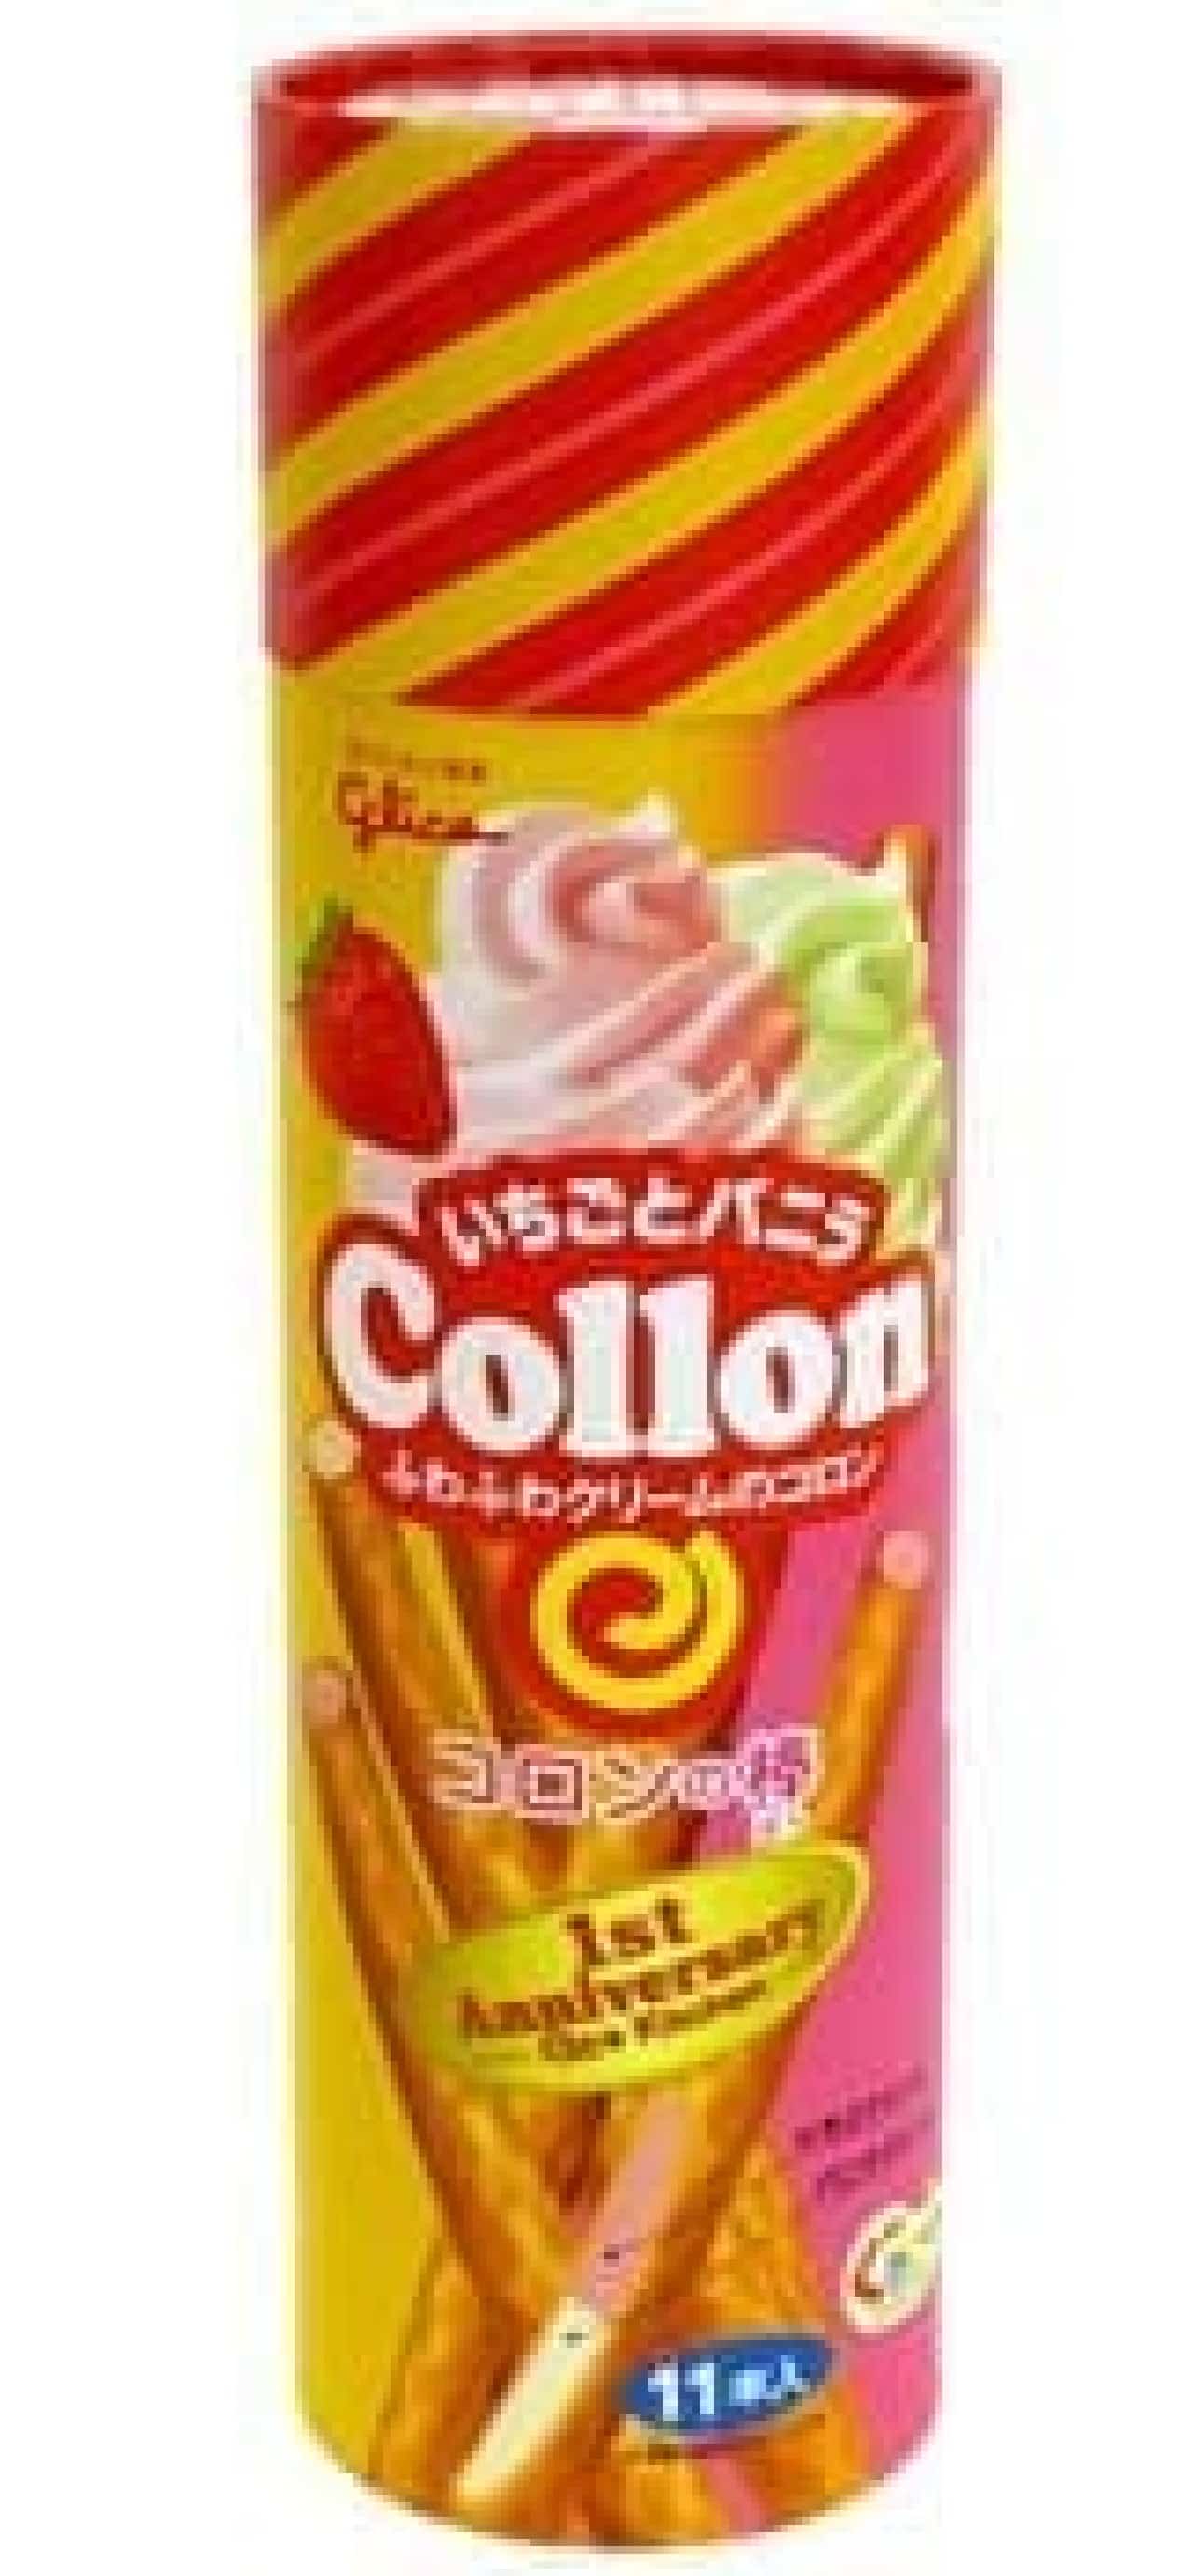 Long colon that you can enjoy two flavors with one, sold in limited quantities